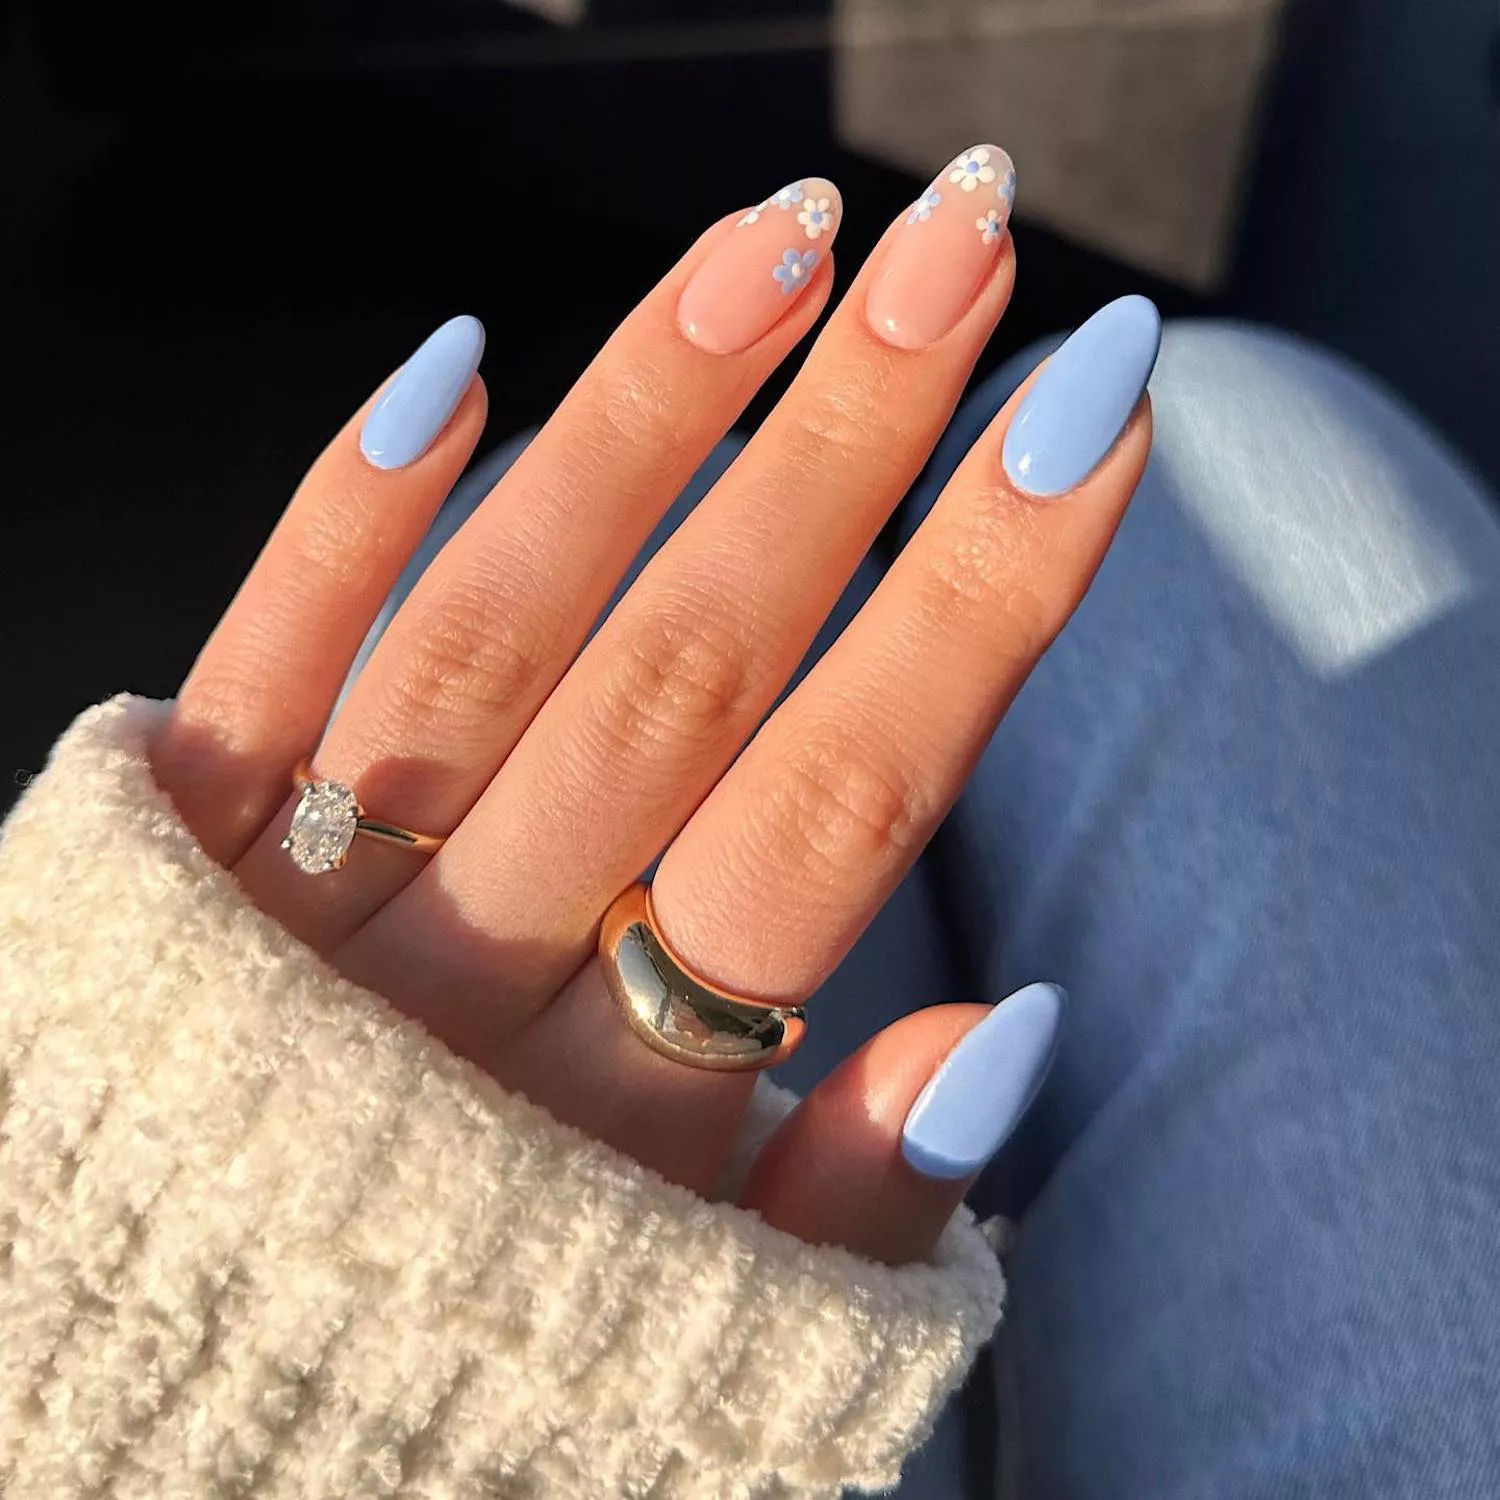 Pastel blue manicure with mini floral tips accent nails